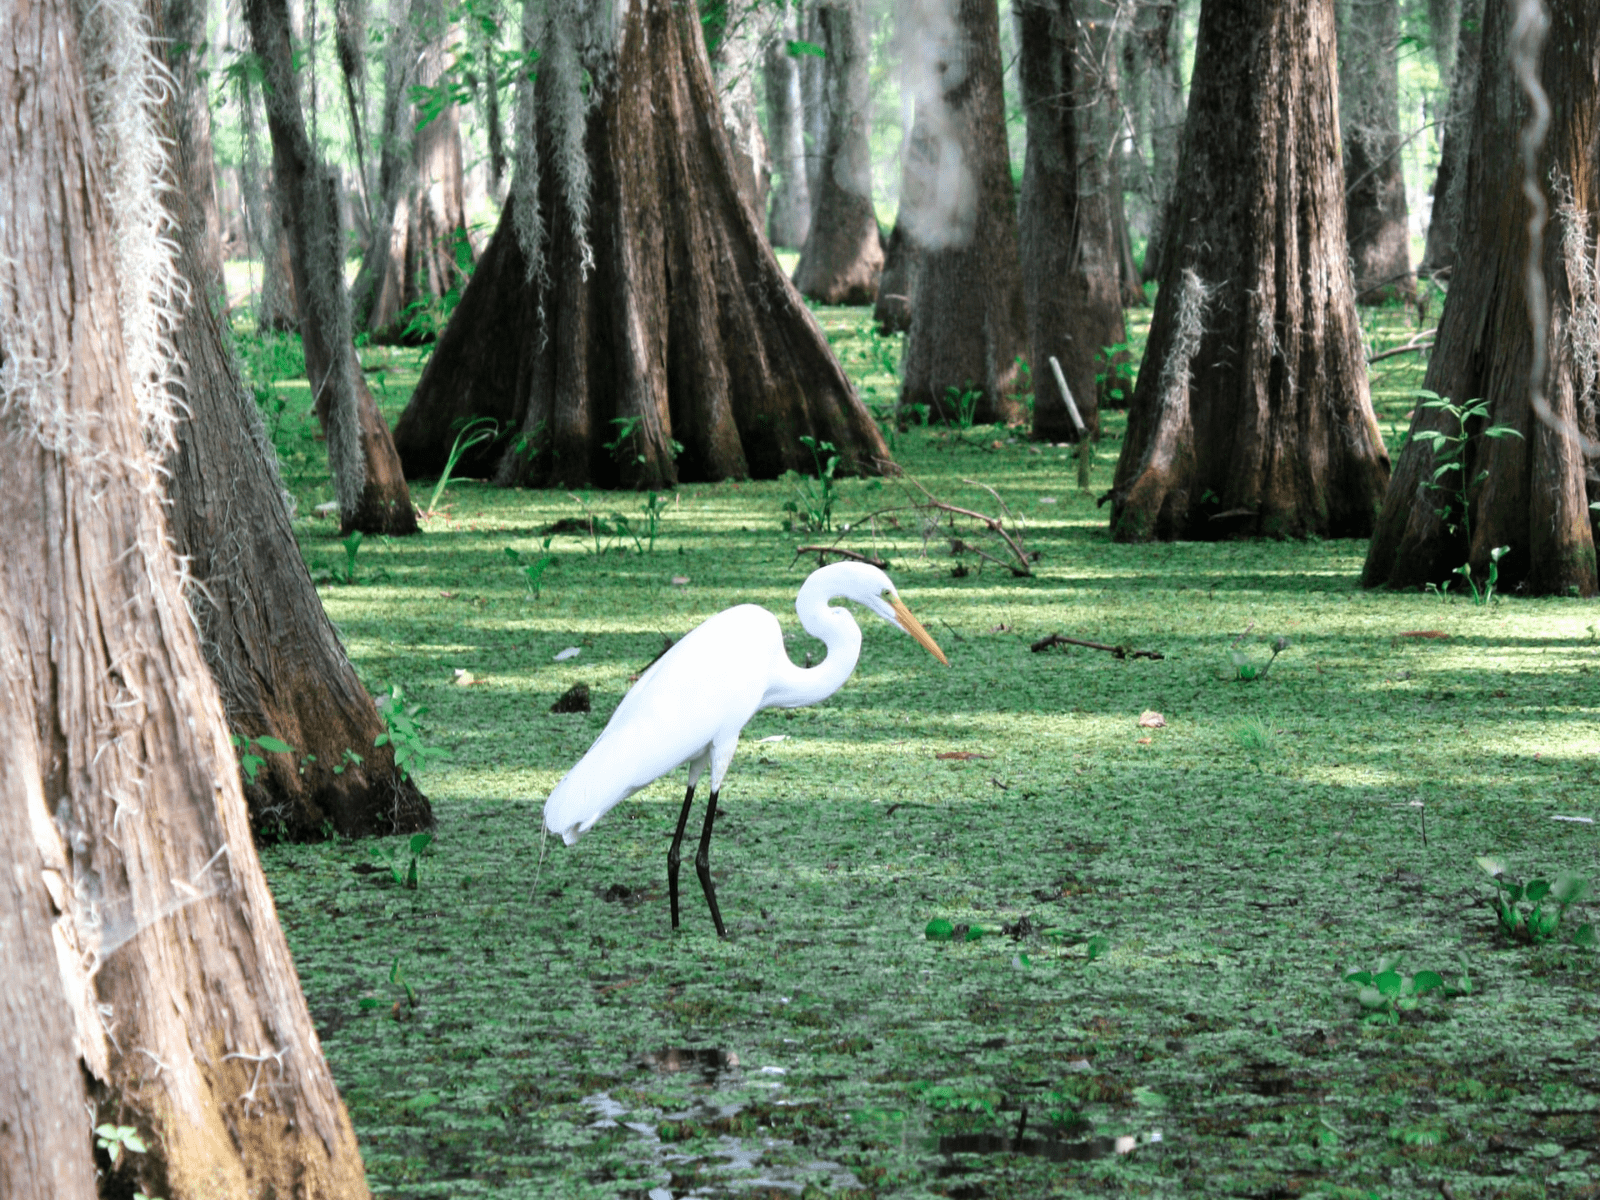 Best things to do in Lafayette Louisiana - Lane Fournerat - An egret in the Lake Martin swamp by Morgane Perraud on Unsplash